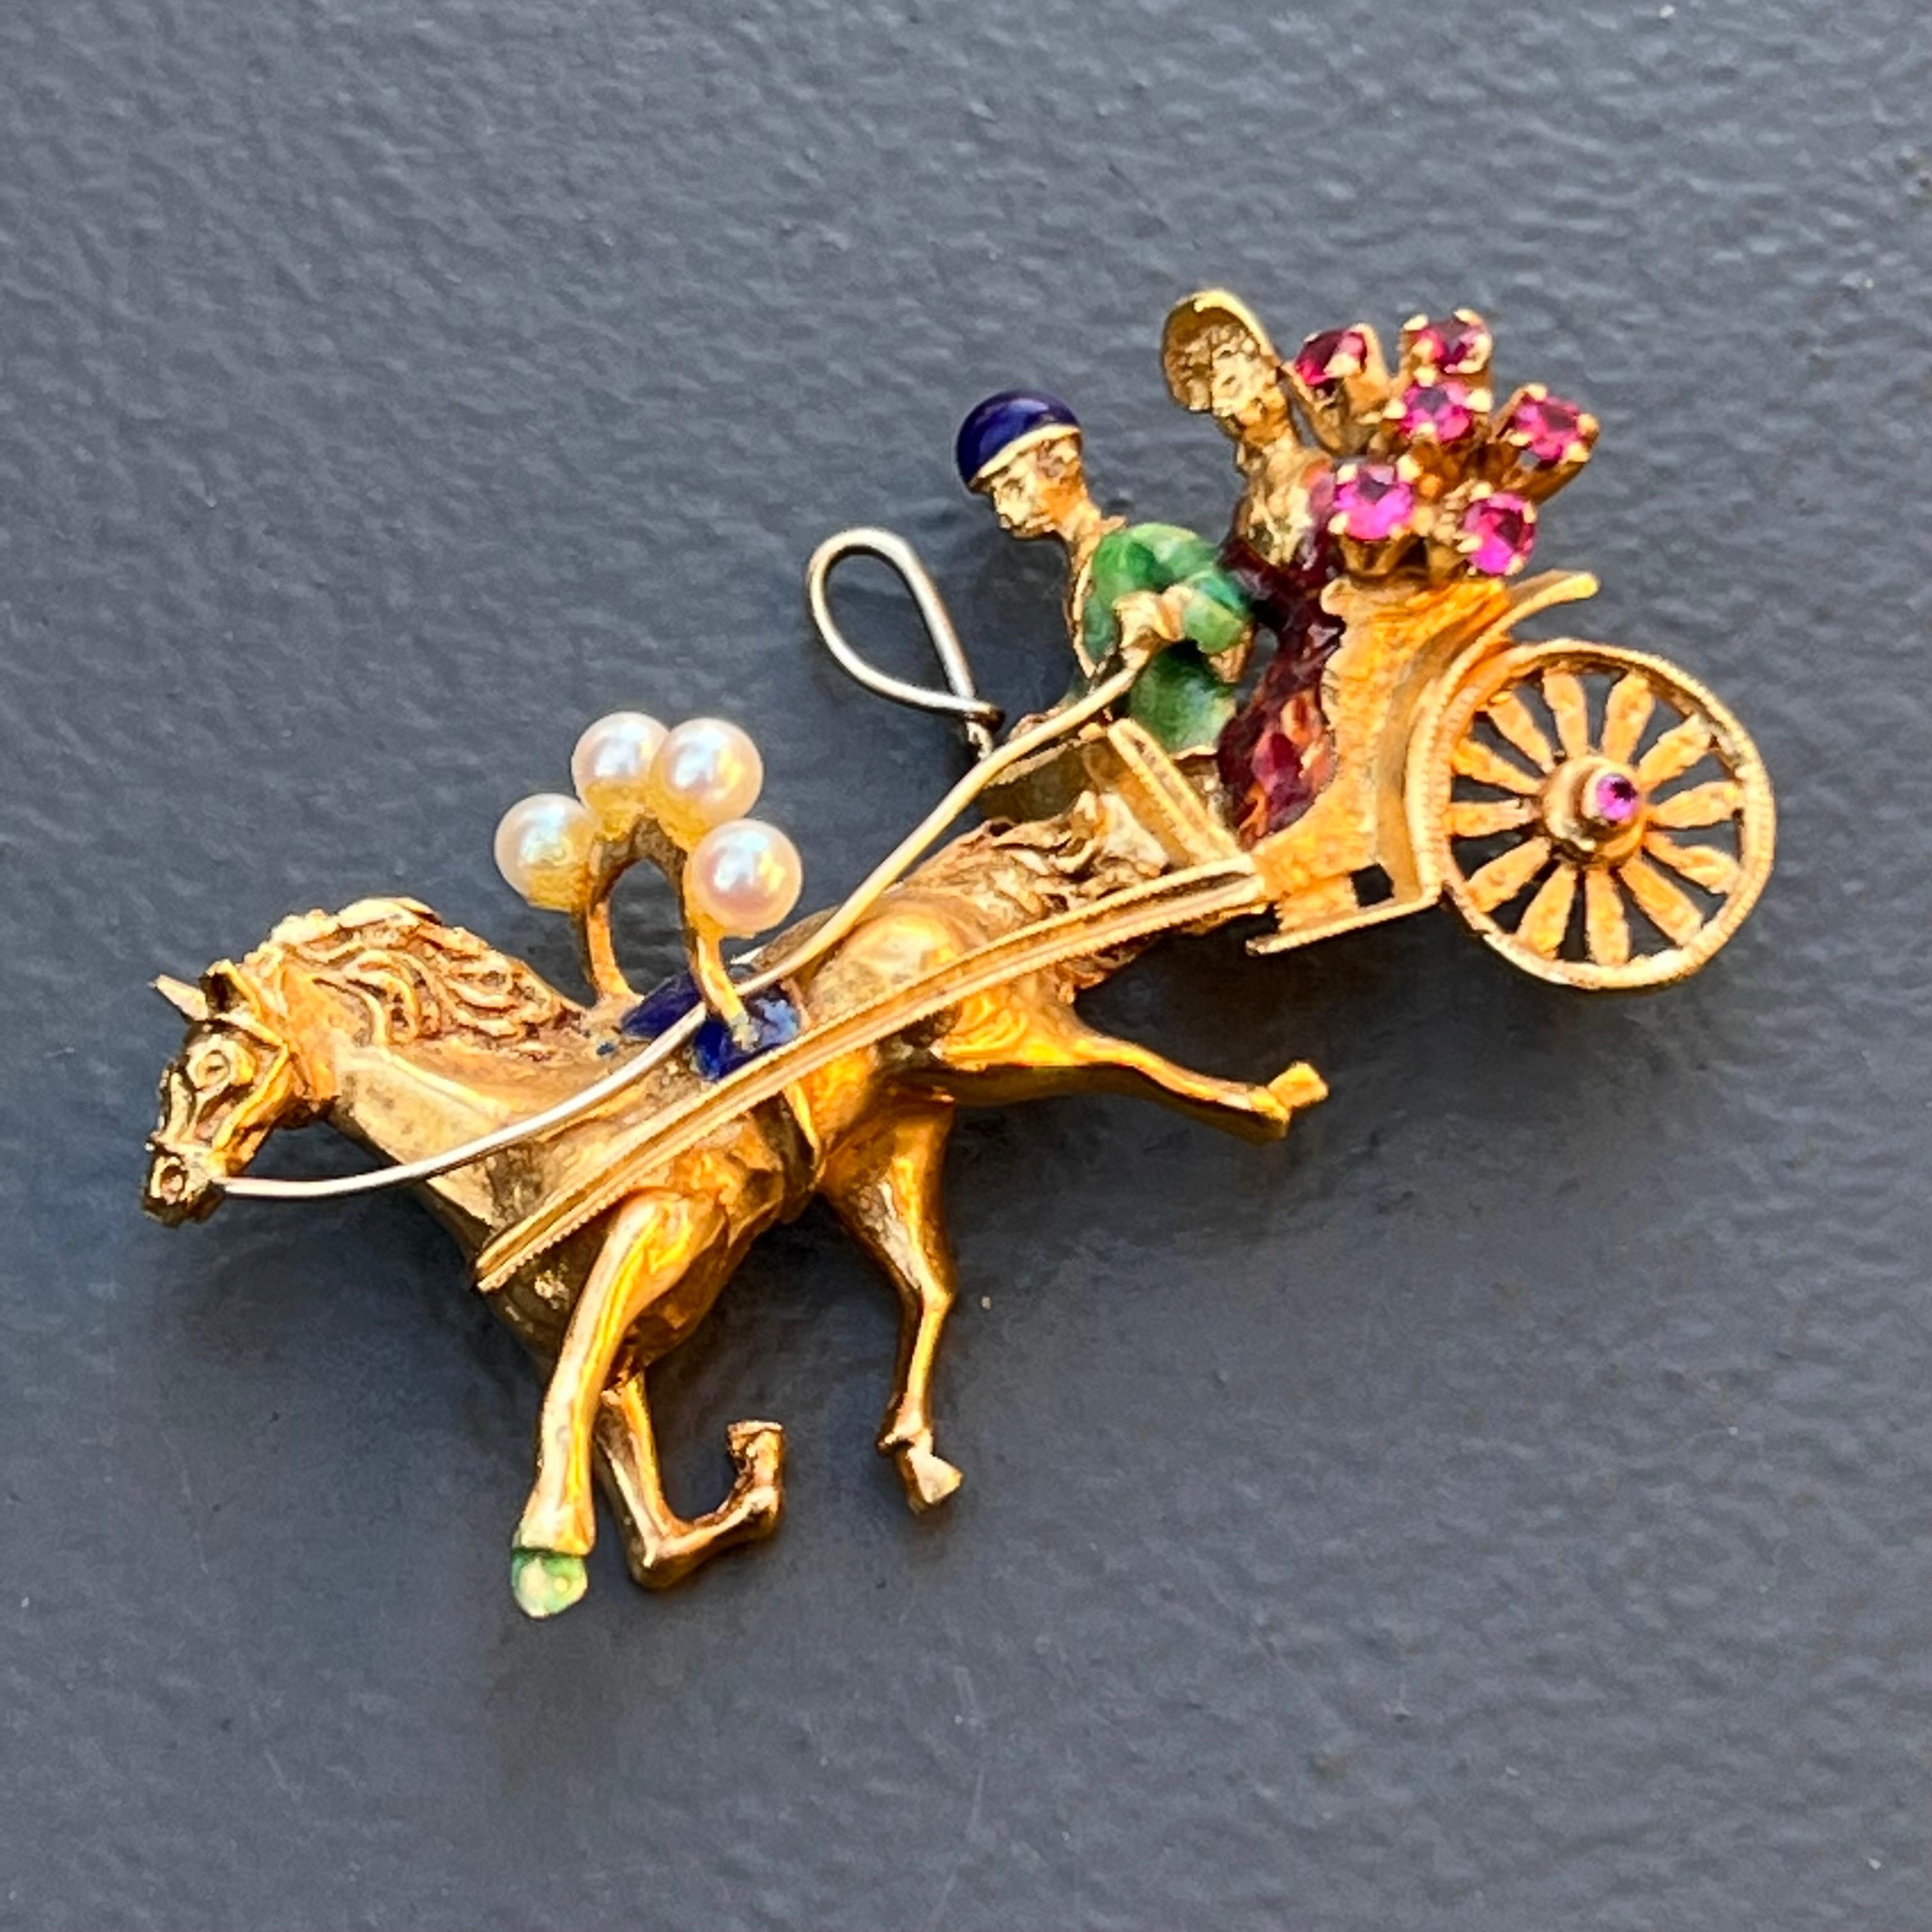 EXTRAORDINARY  Vintage 18kt gold , genuine rubies and cultured pearls ,newlywed couple pin /brooch The newly weds are sitting in an horse carriage with beautiful details , groom and bride has light enamel work and she is holding a flower bouquet